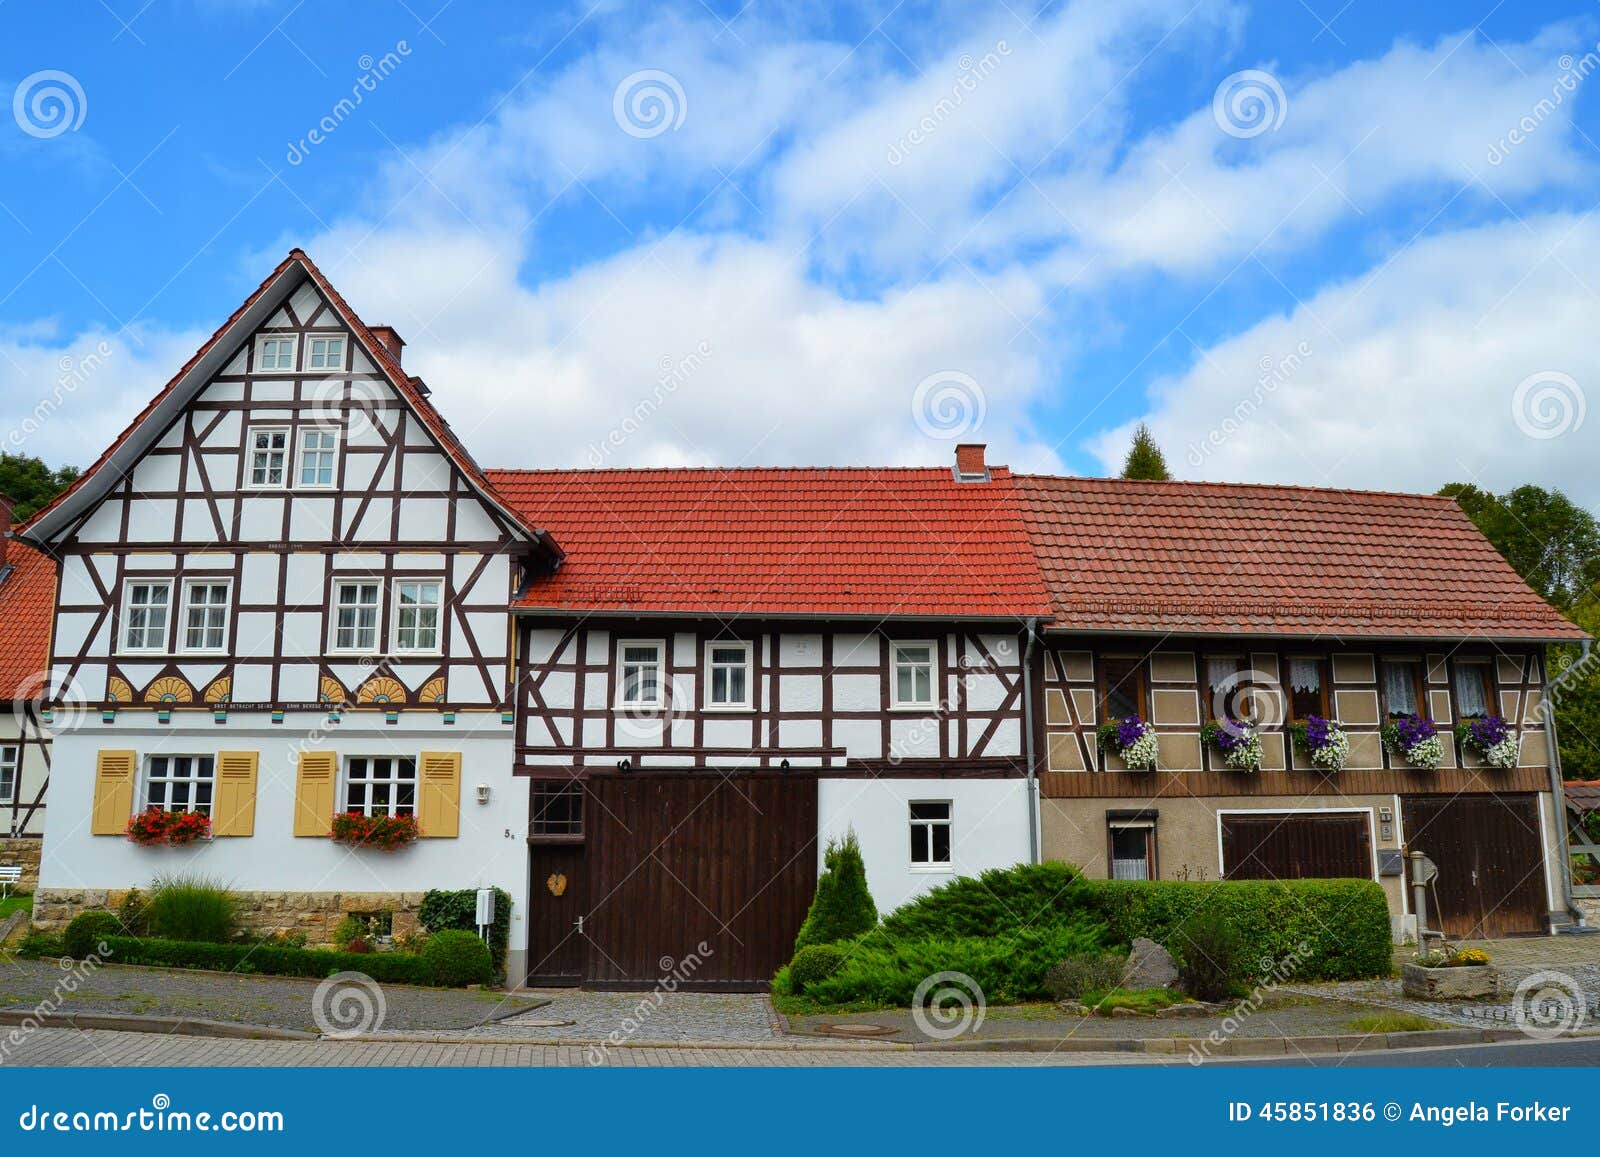 gorgeous half-timbered houses in germany